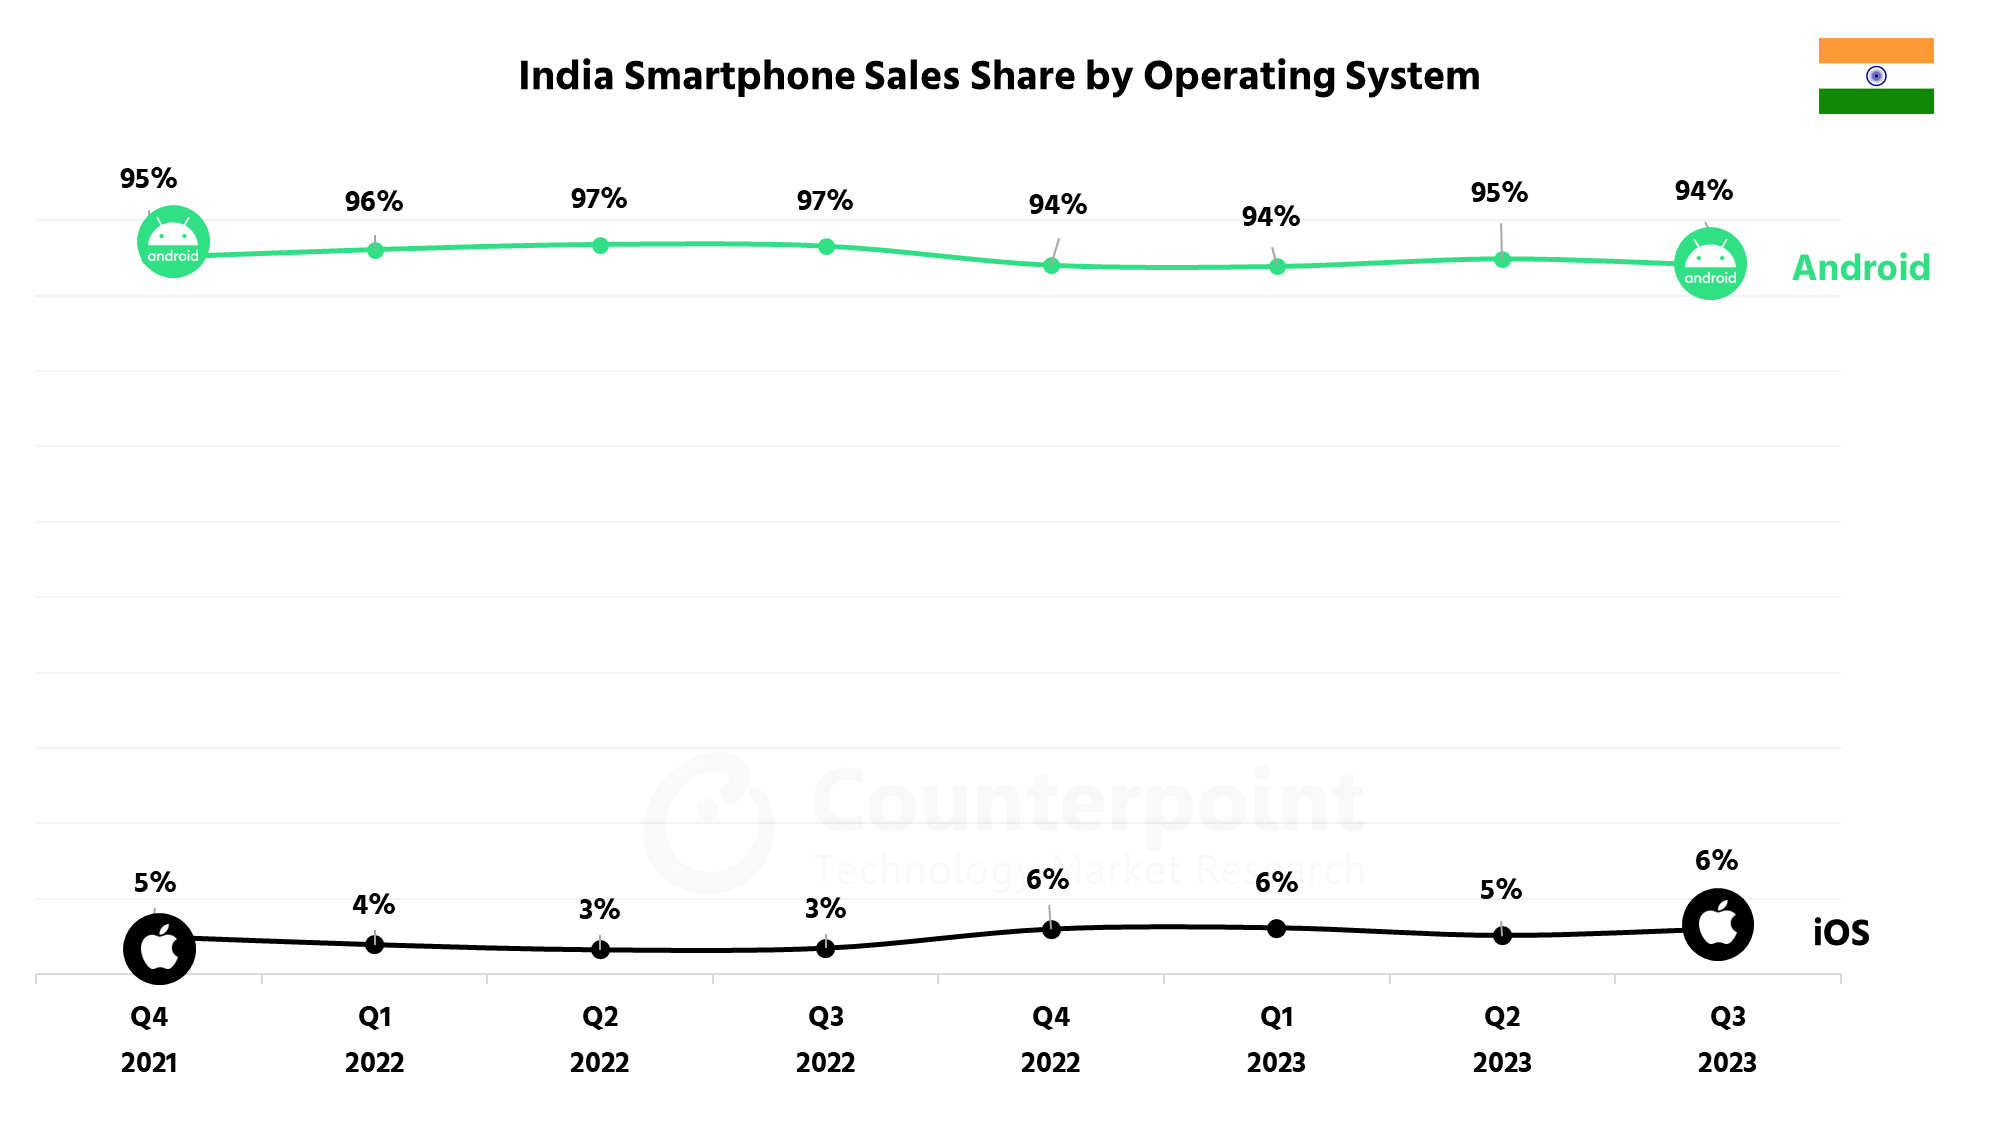 India Smartphone OS Sales Share Q3 2023